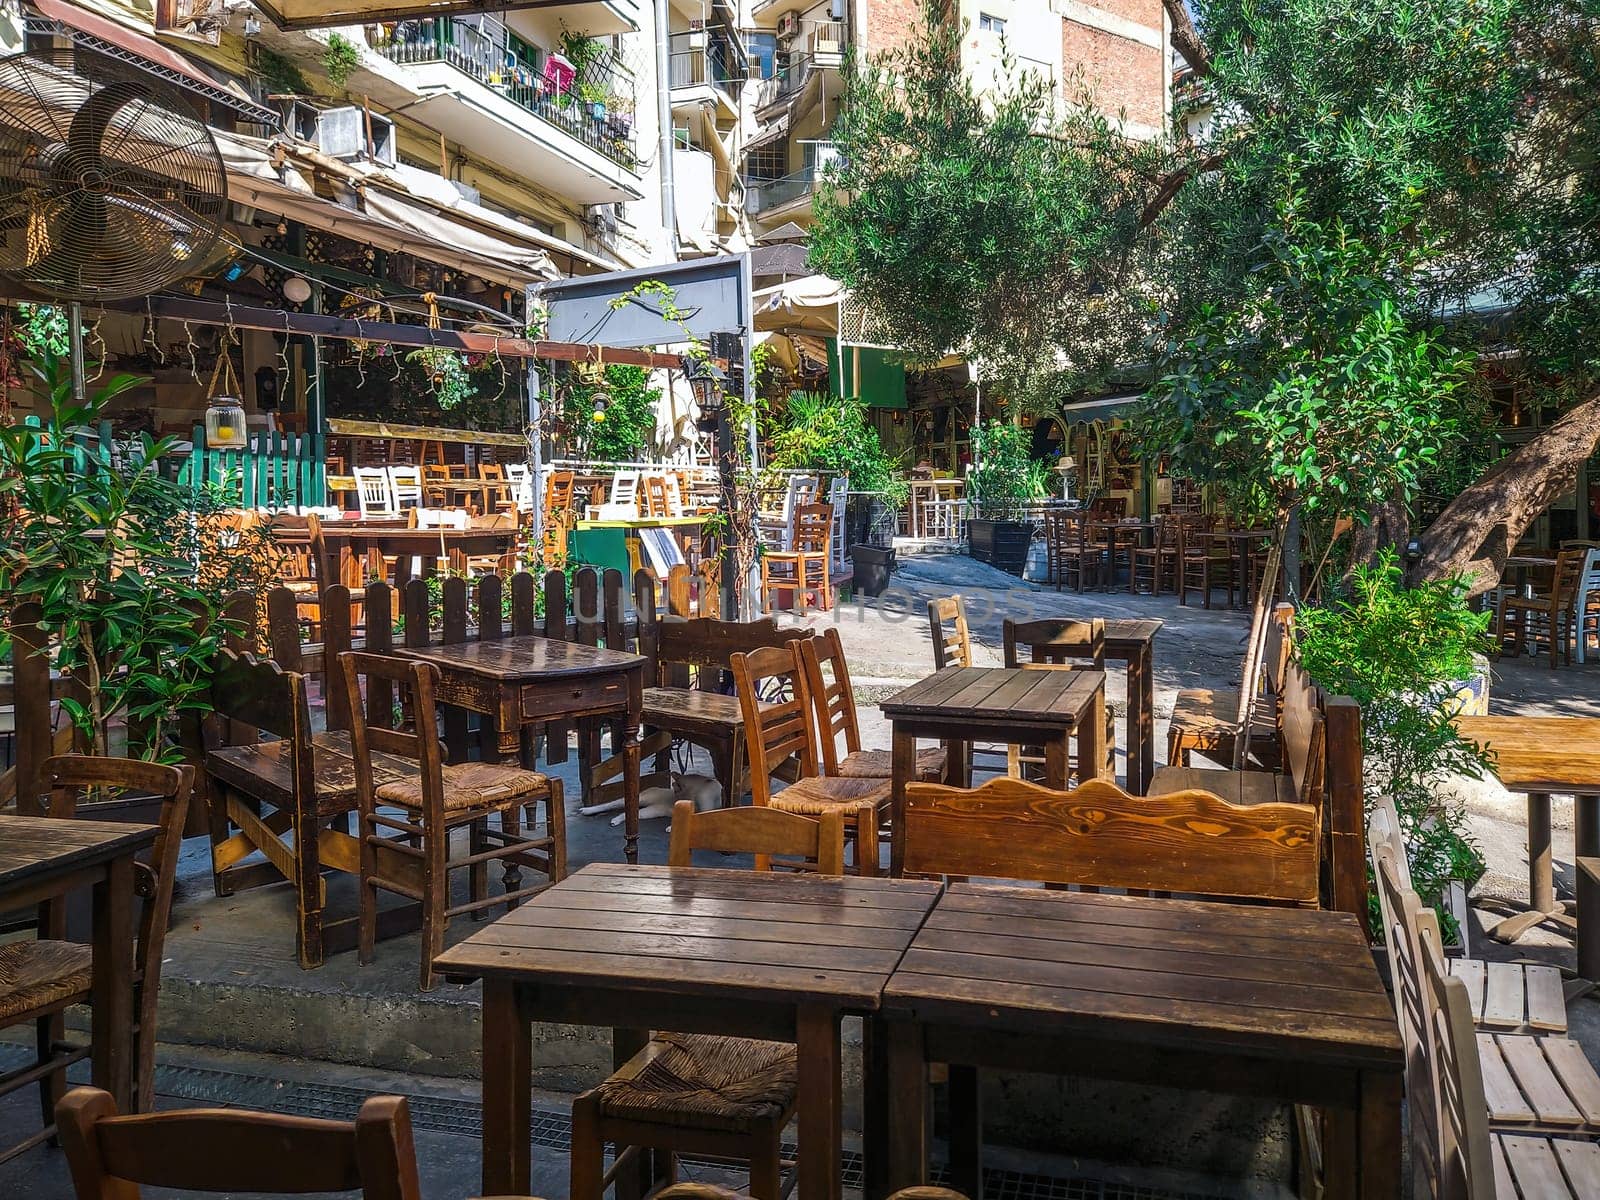 Day view of the empty traditional outdoor seating area of taverns with colorful chairs, tables and vintage decoration at the historic Bit Bazaar area.